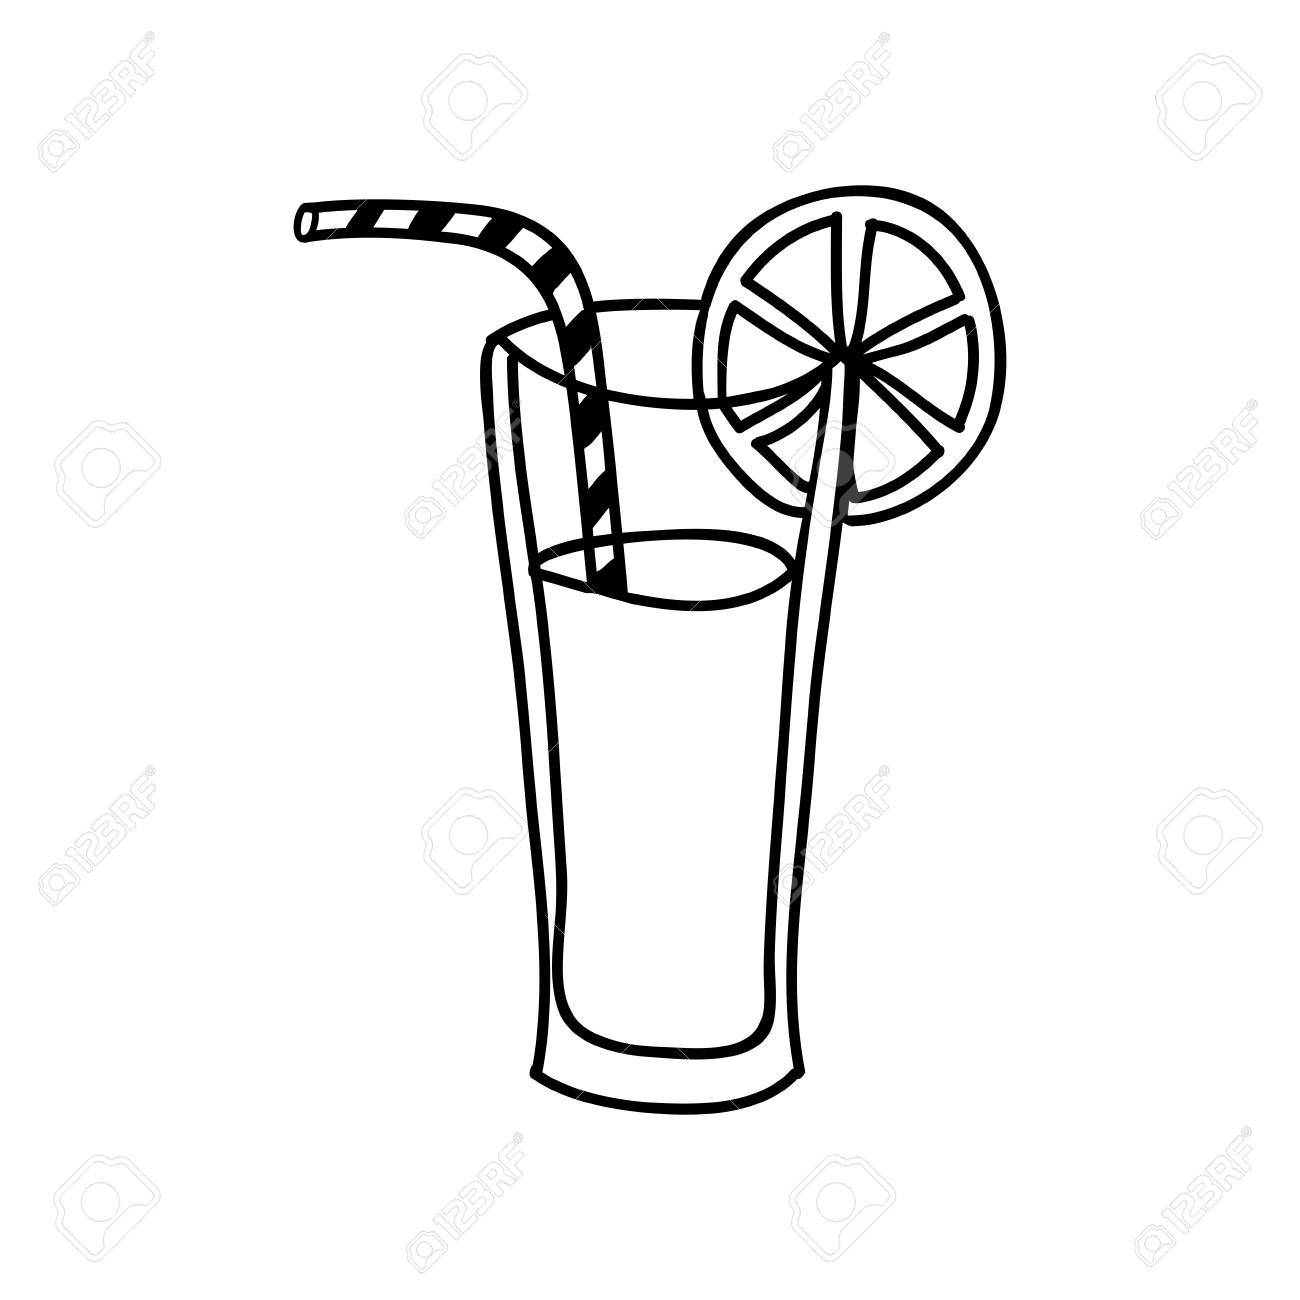 Juice Clipart glass drawing